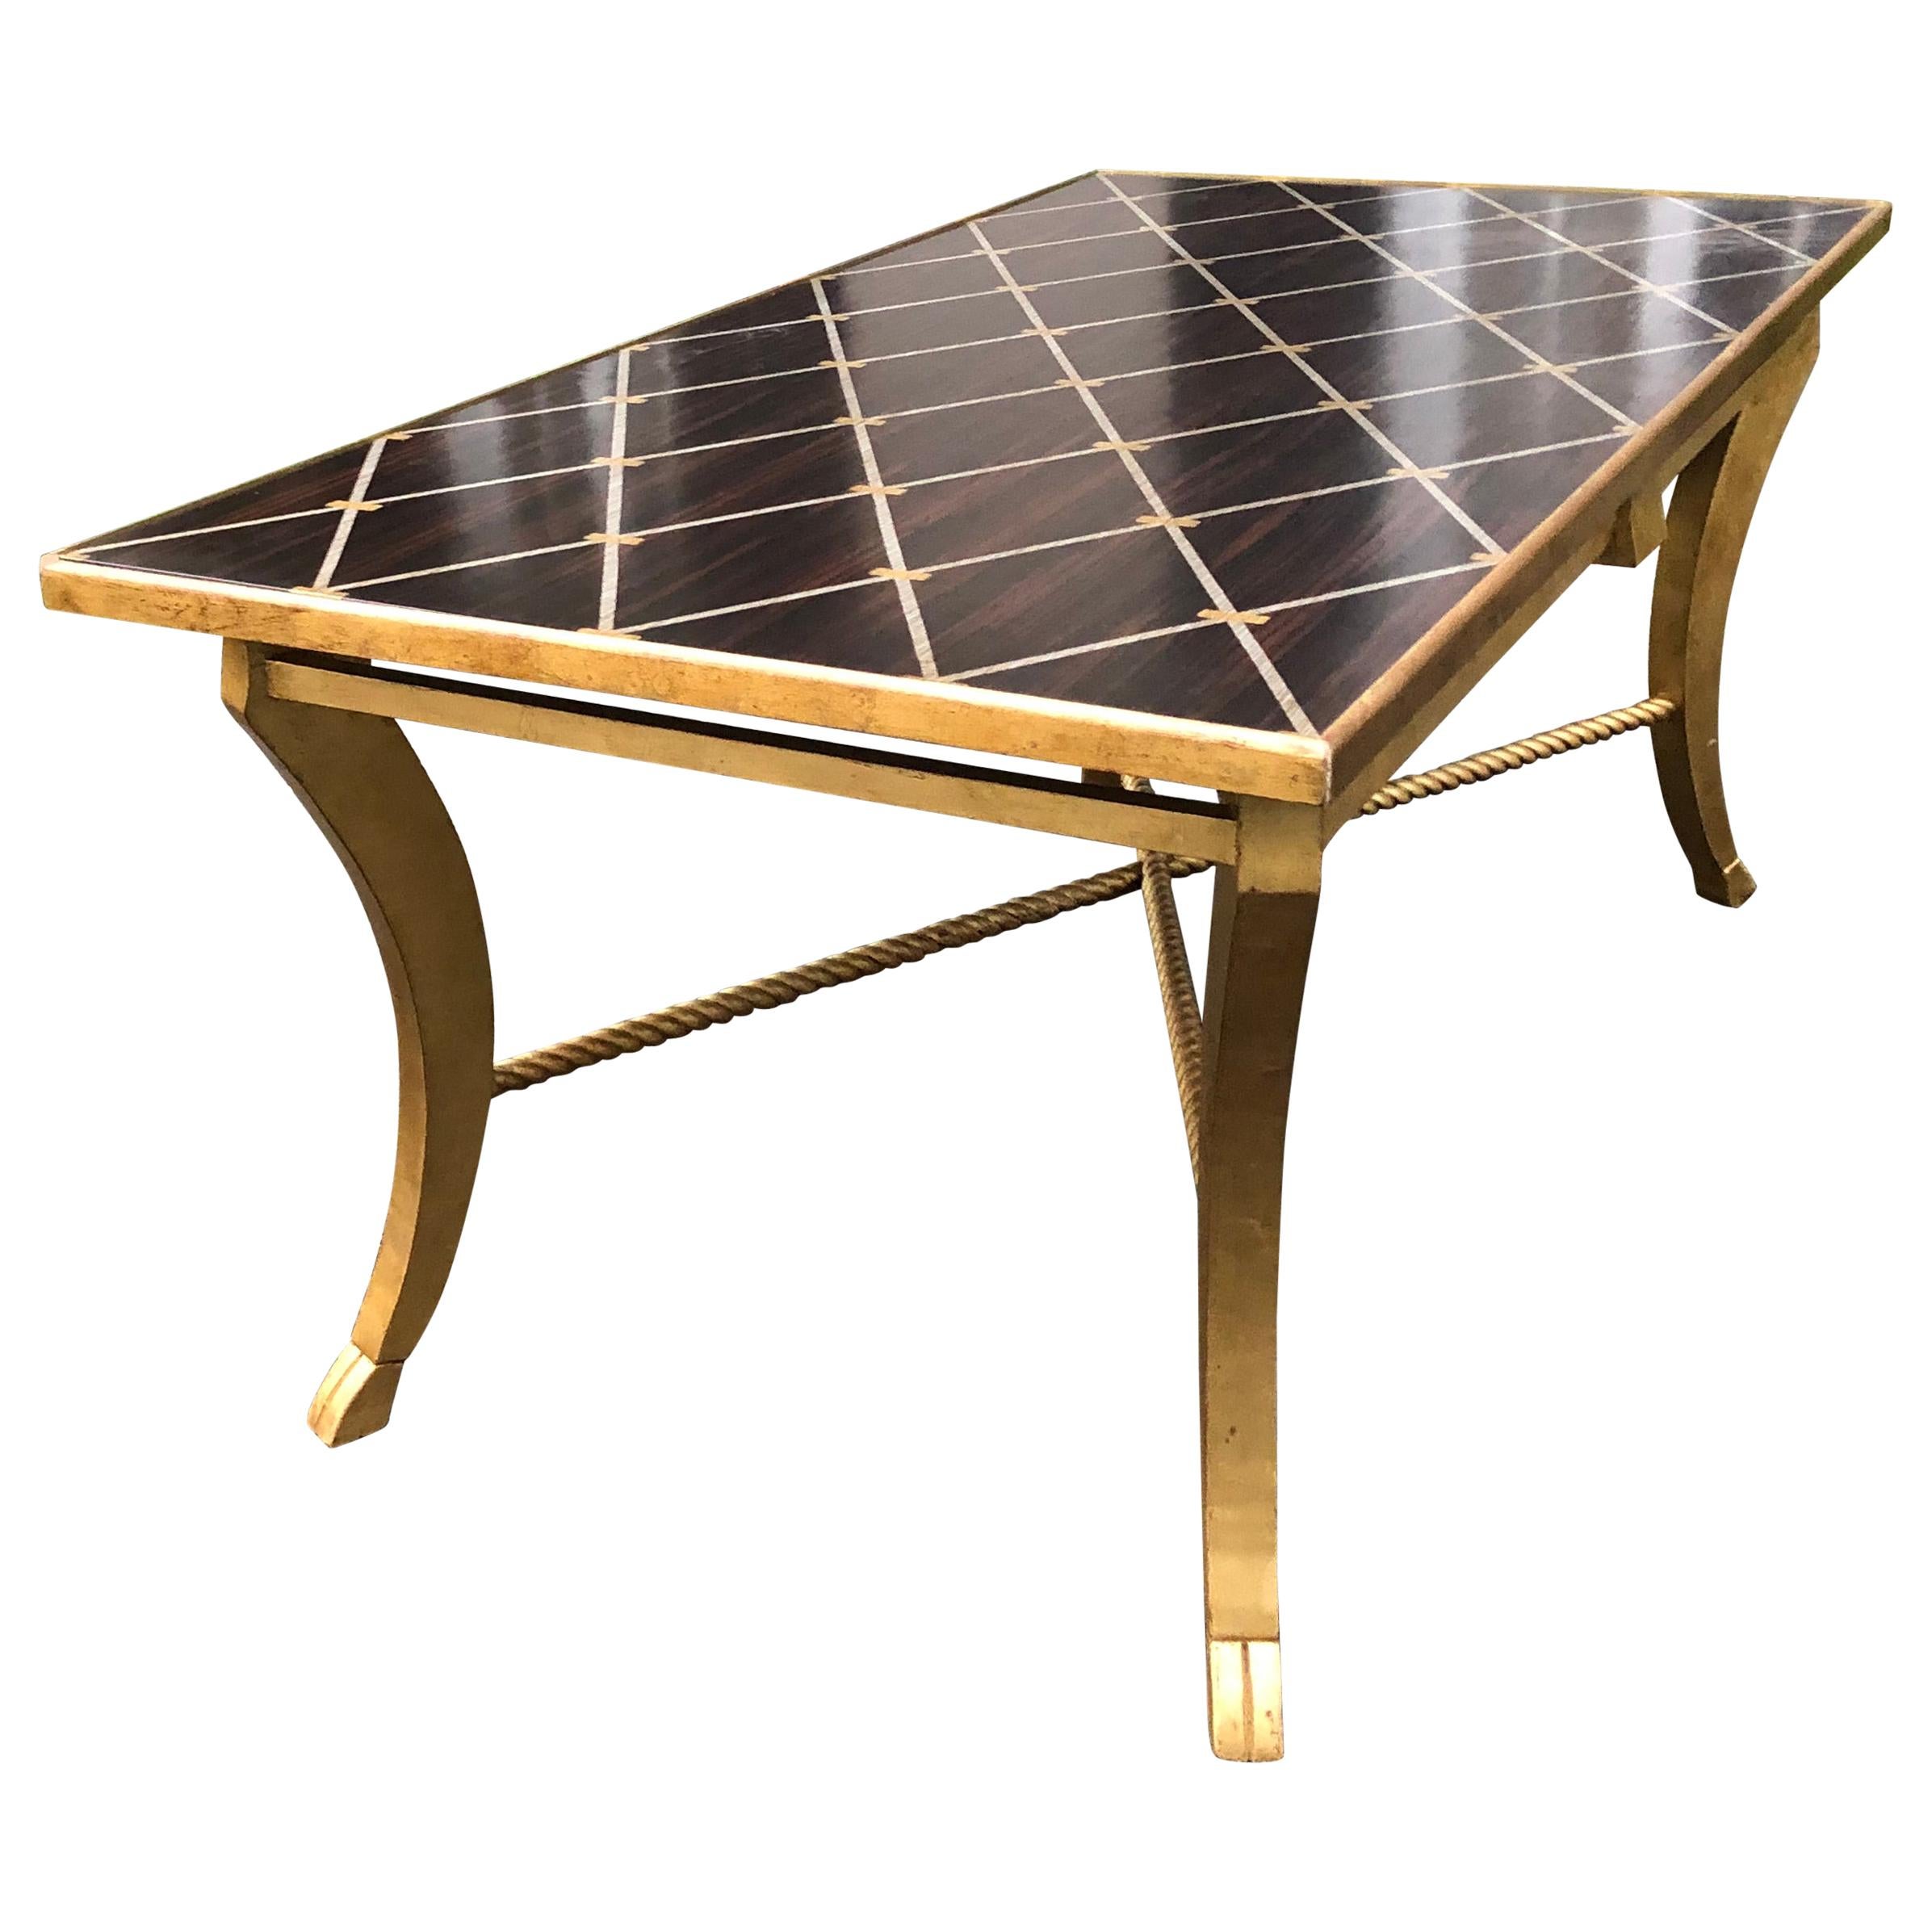 Sophisticated Inlaid Wood Coffee Table by Amy Howard